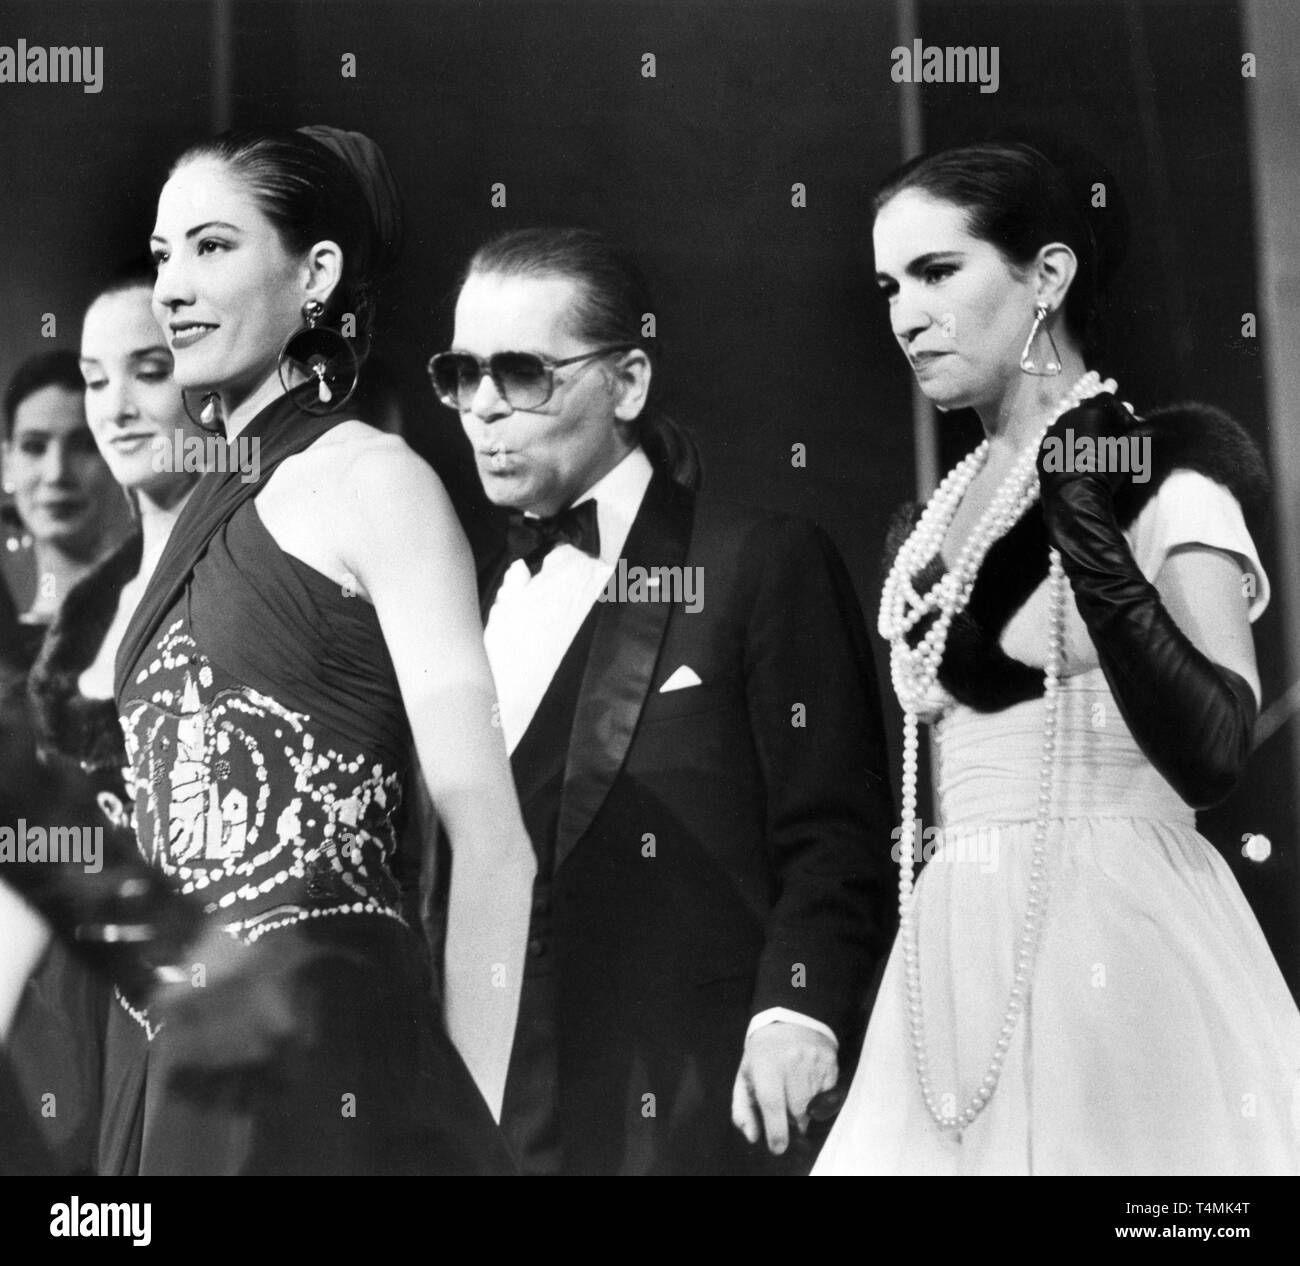 The German fashion designer Karl Lagerfeld appears with his models